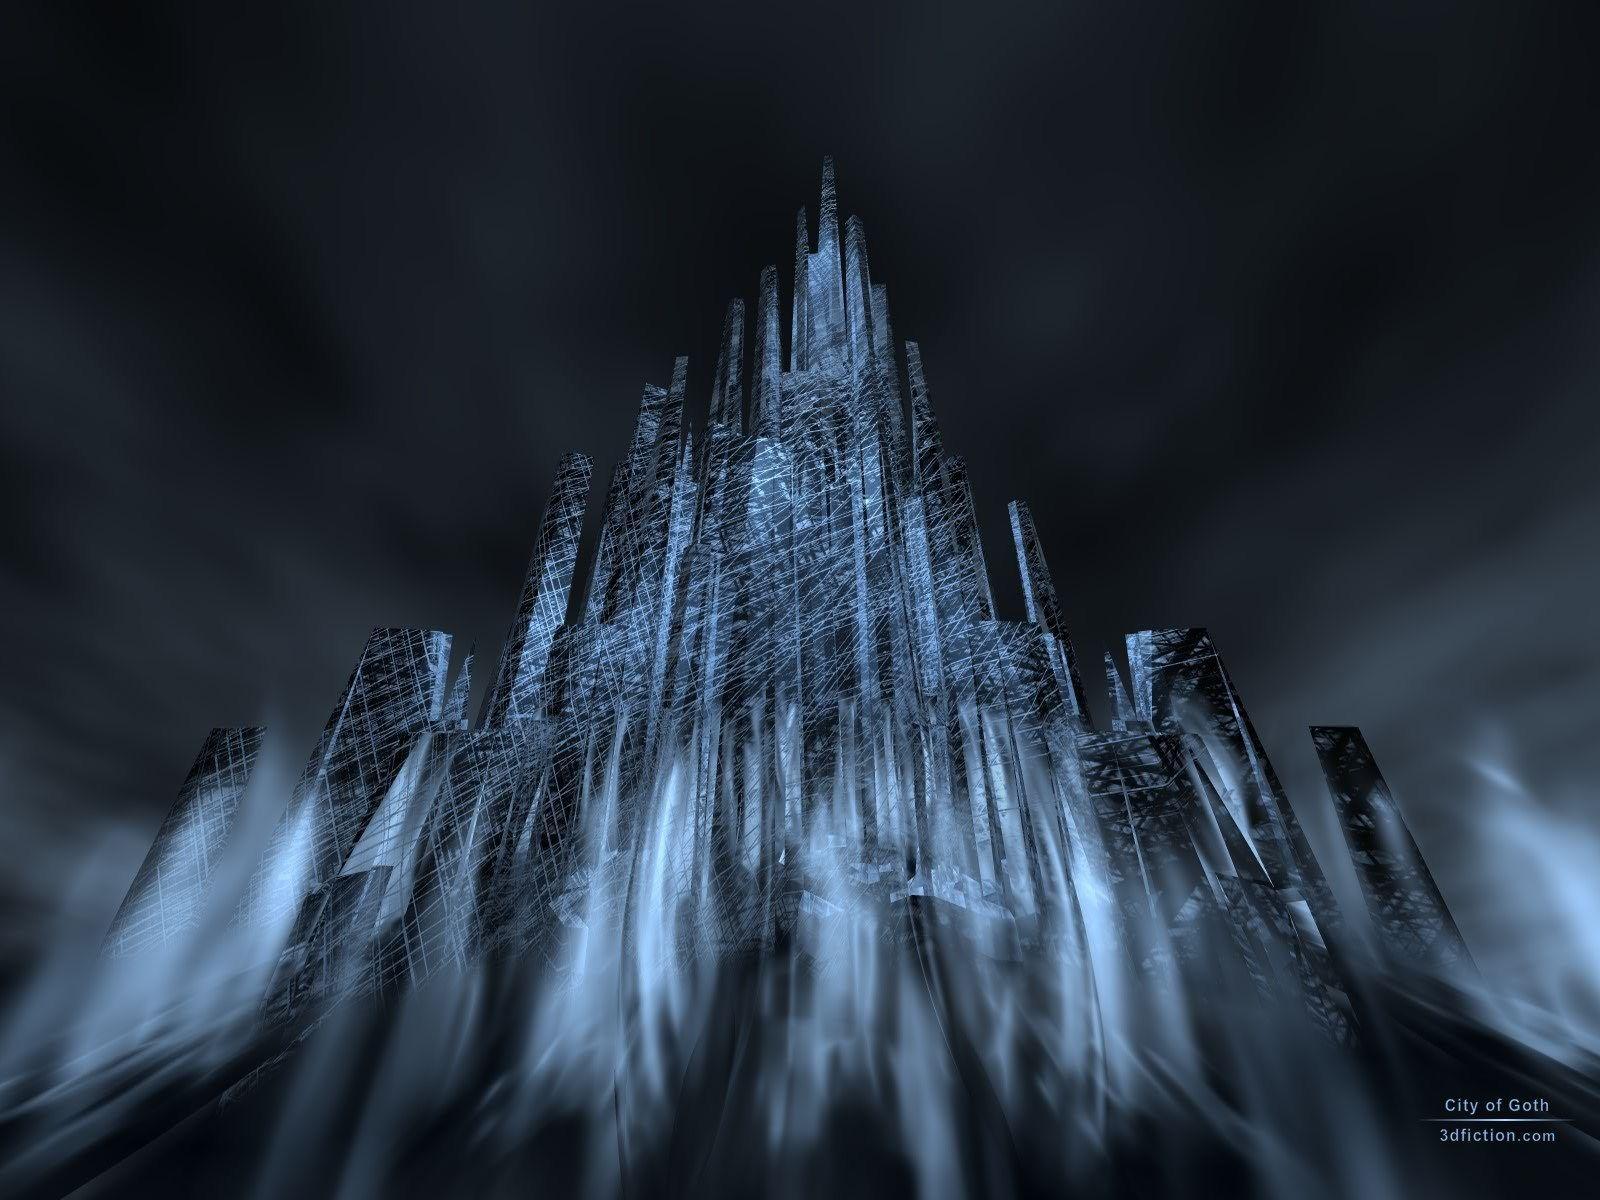 3D City of Goth wallpaper from Gothic wallpaper